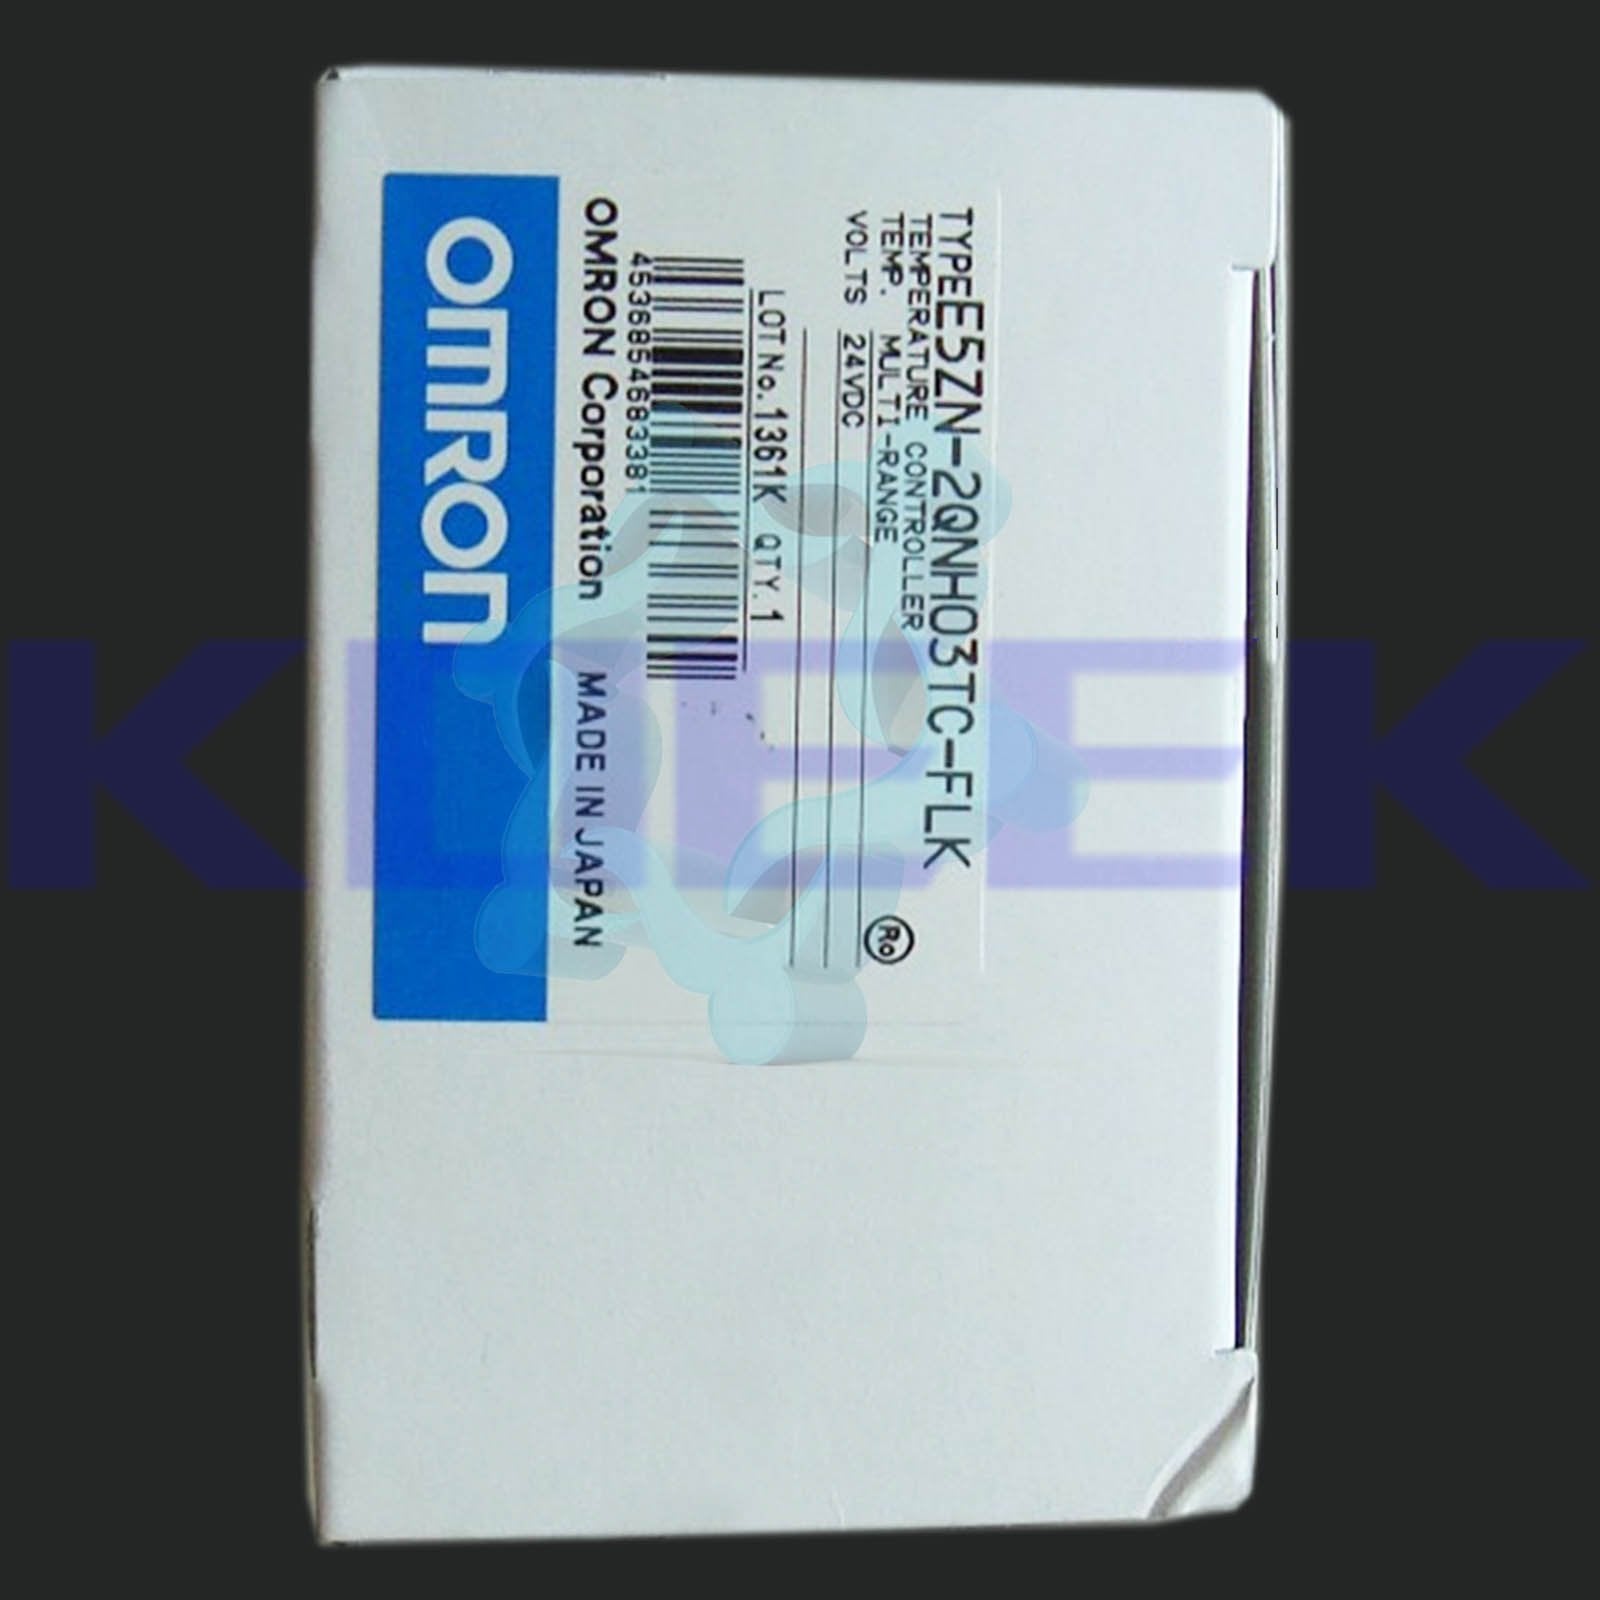 E5ZN-2QNH03TC-FLK KOEED 201-500, 90%, import_2020_10_10_031751, Omron, Other